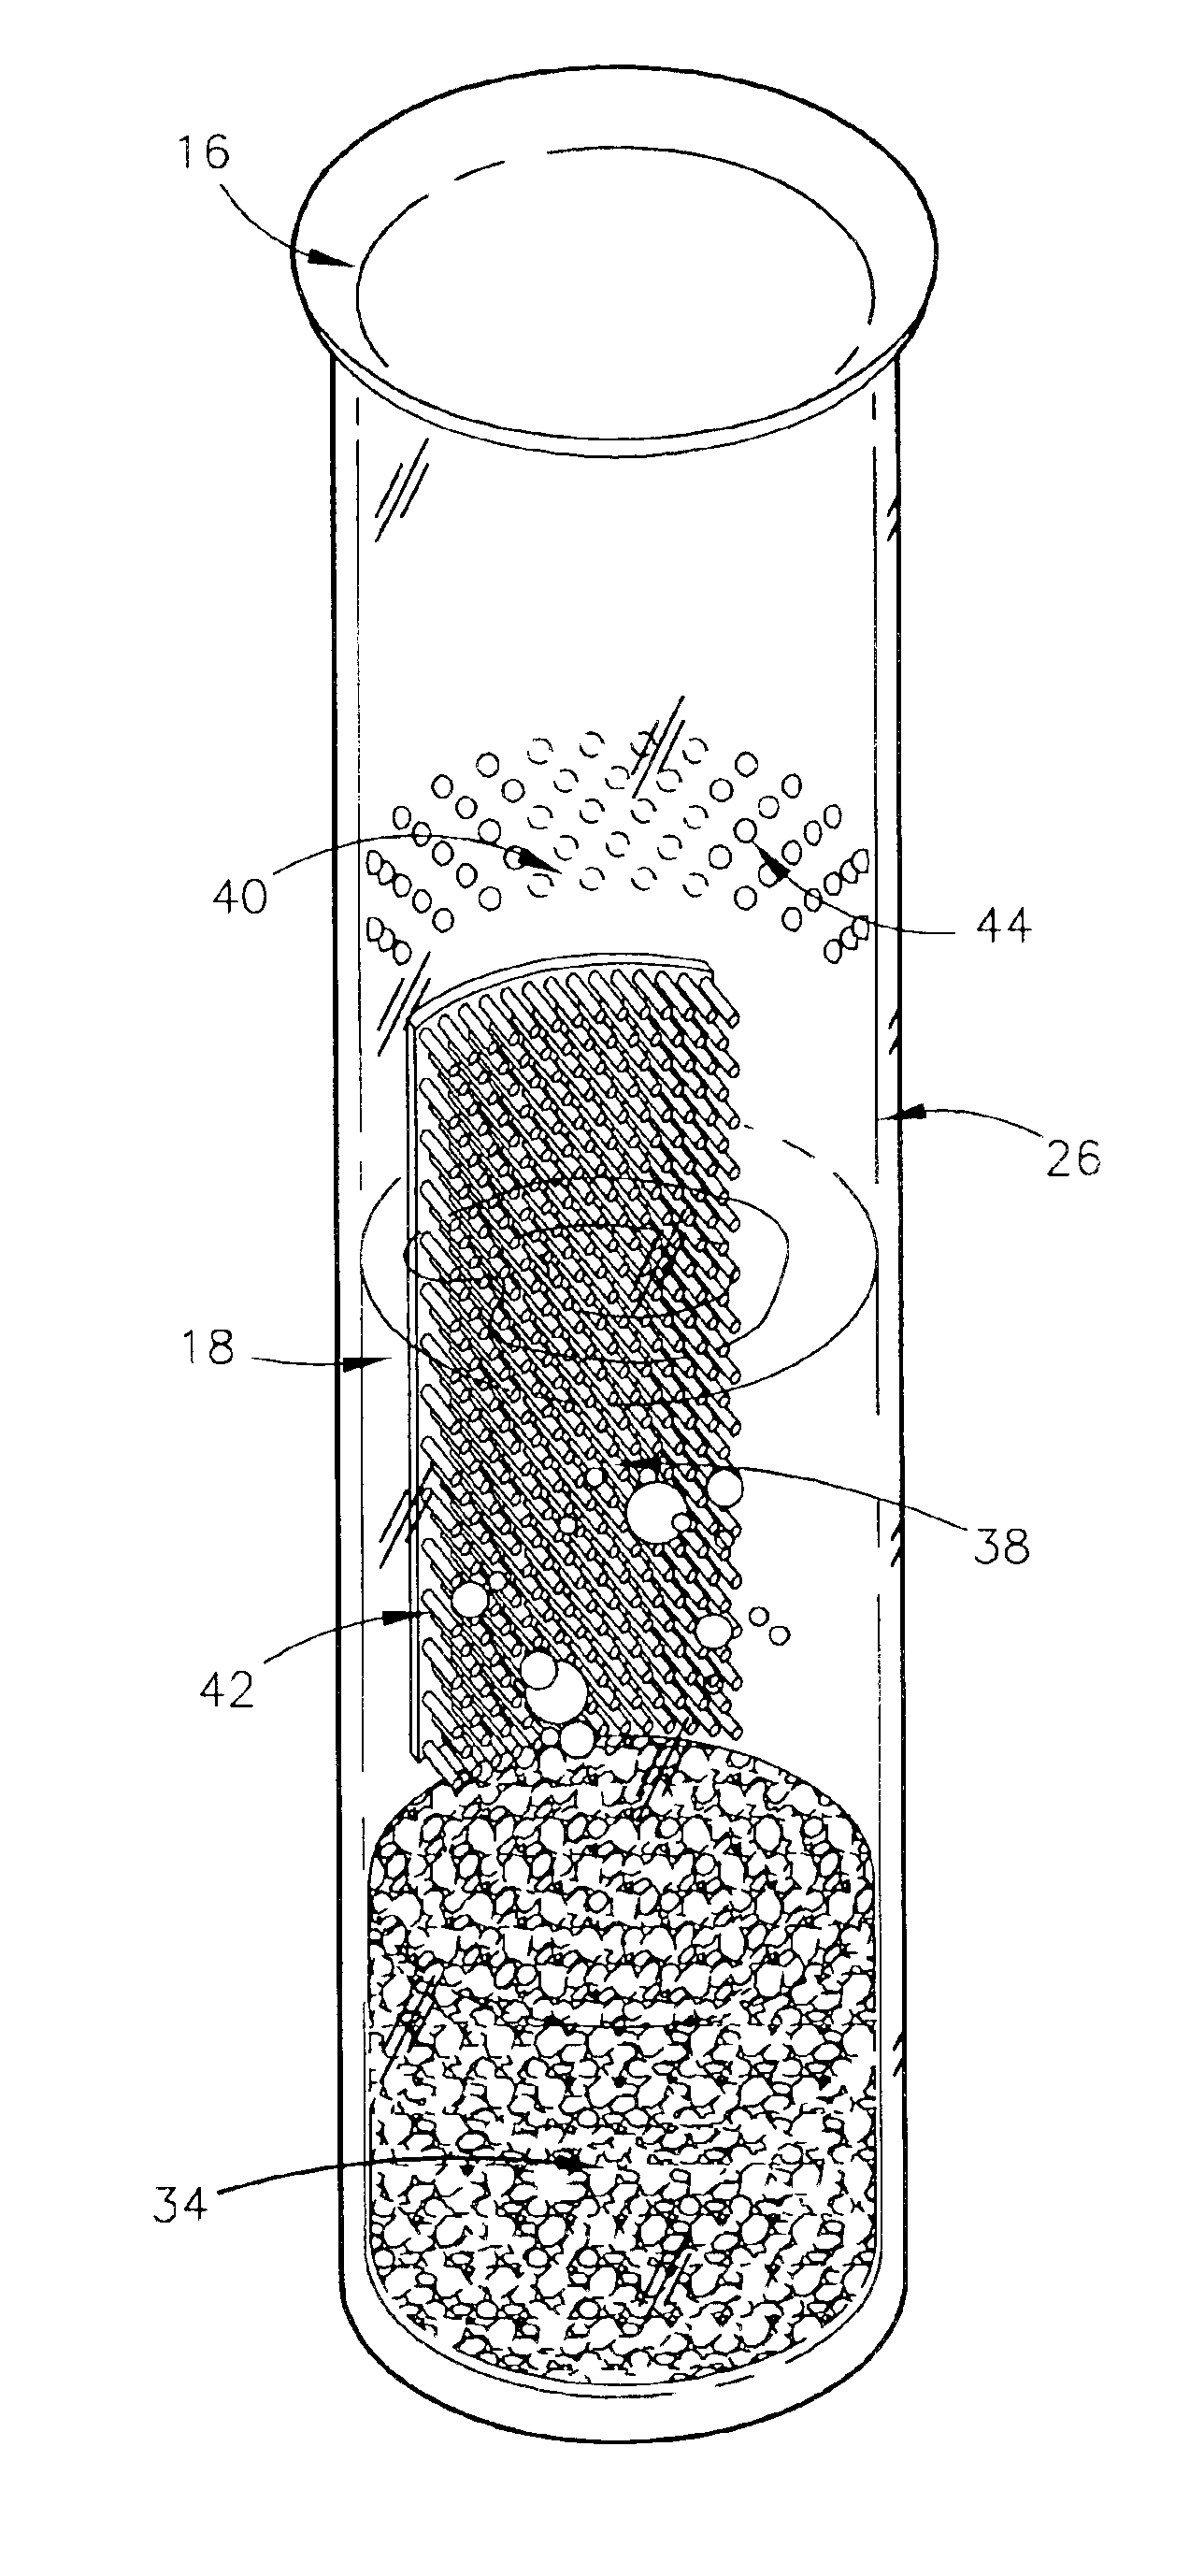 Apparatus for cleaning an animal's paw